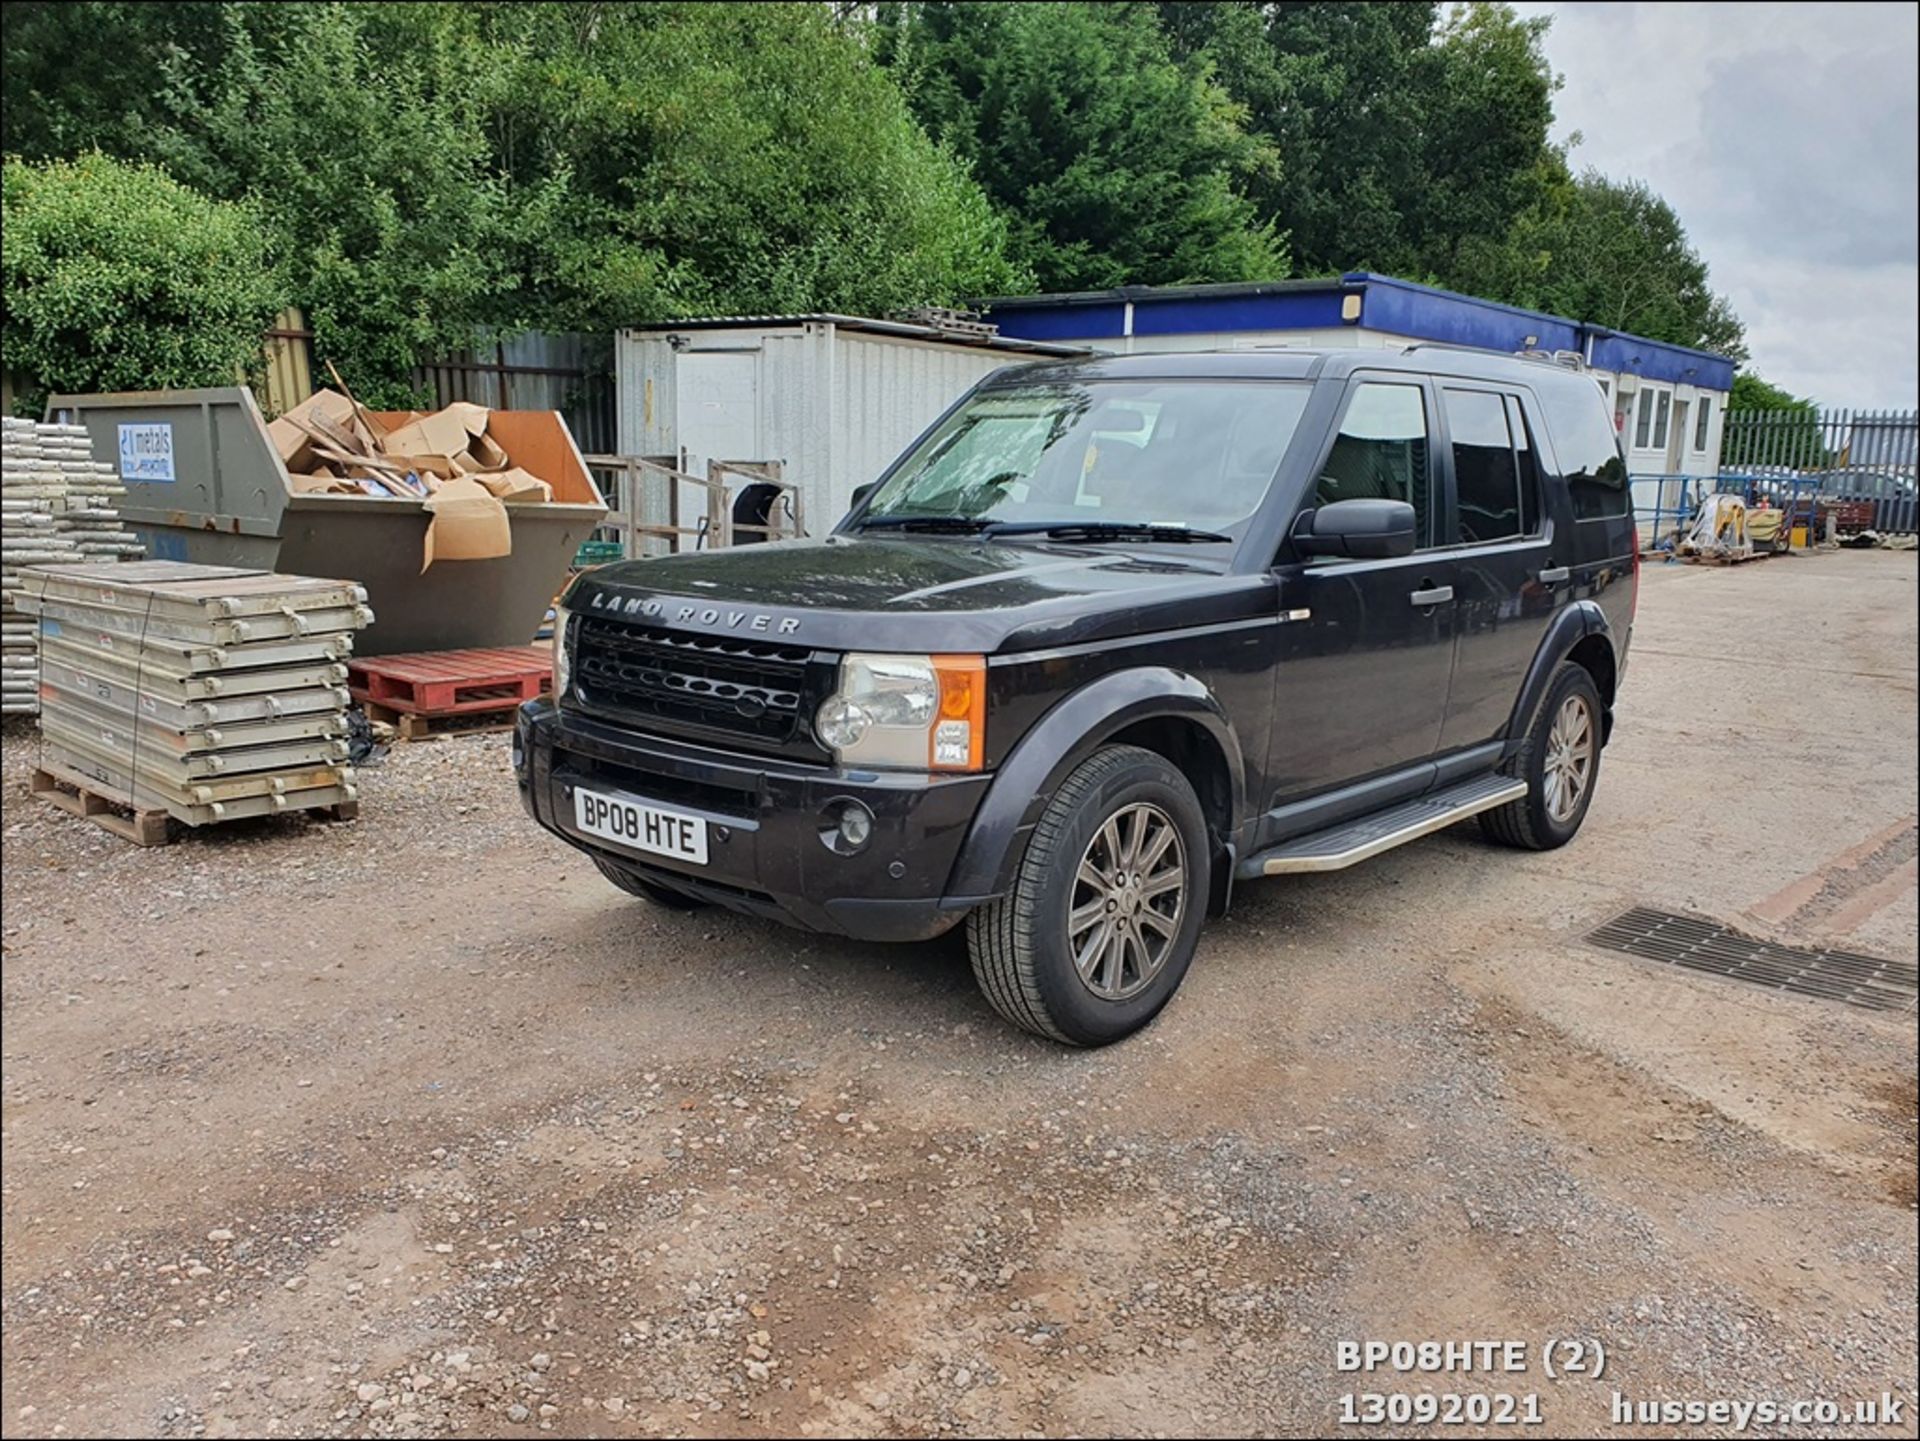 08/08 LAND ROVER DISCOVERY TDV6 SE A - 2720cc 5dr Estate (Brown, 190k) - Image 2 of 18